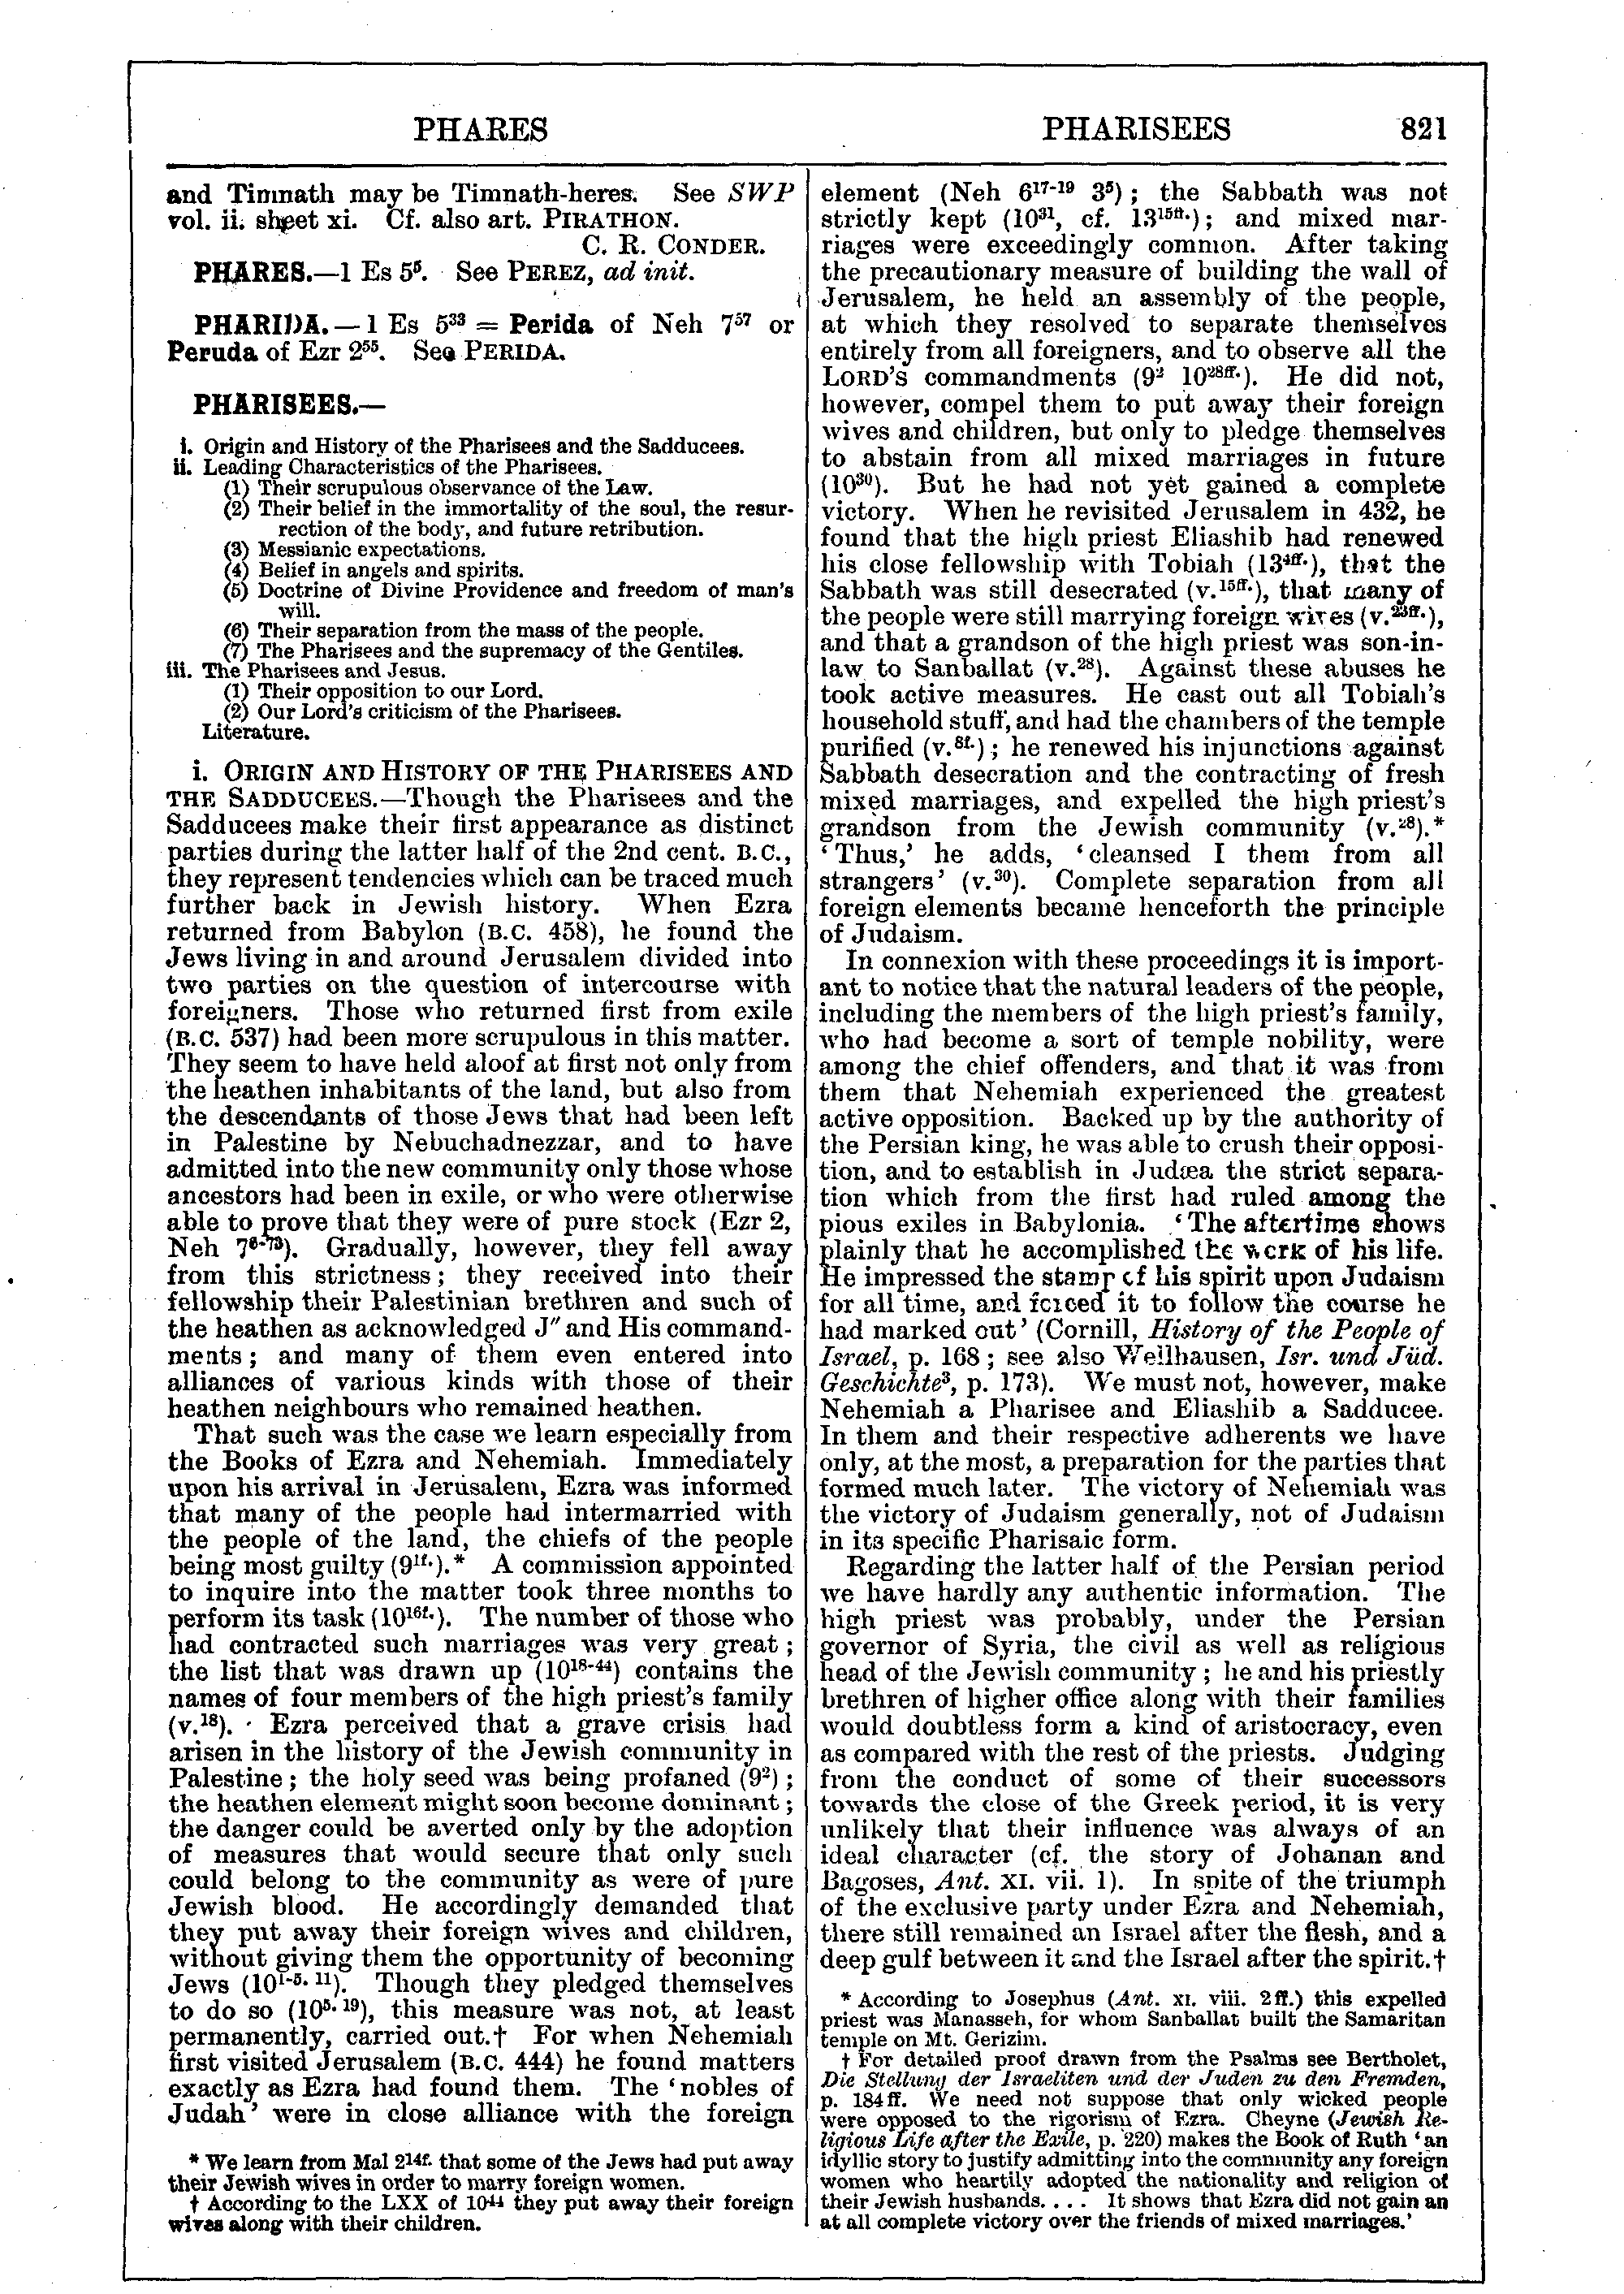 Image of page 821